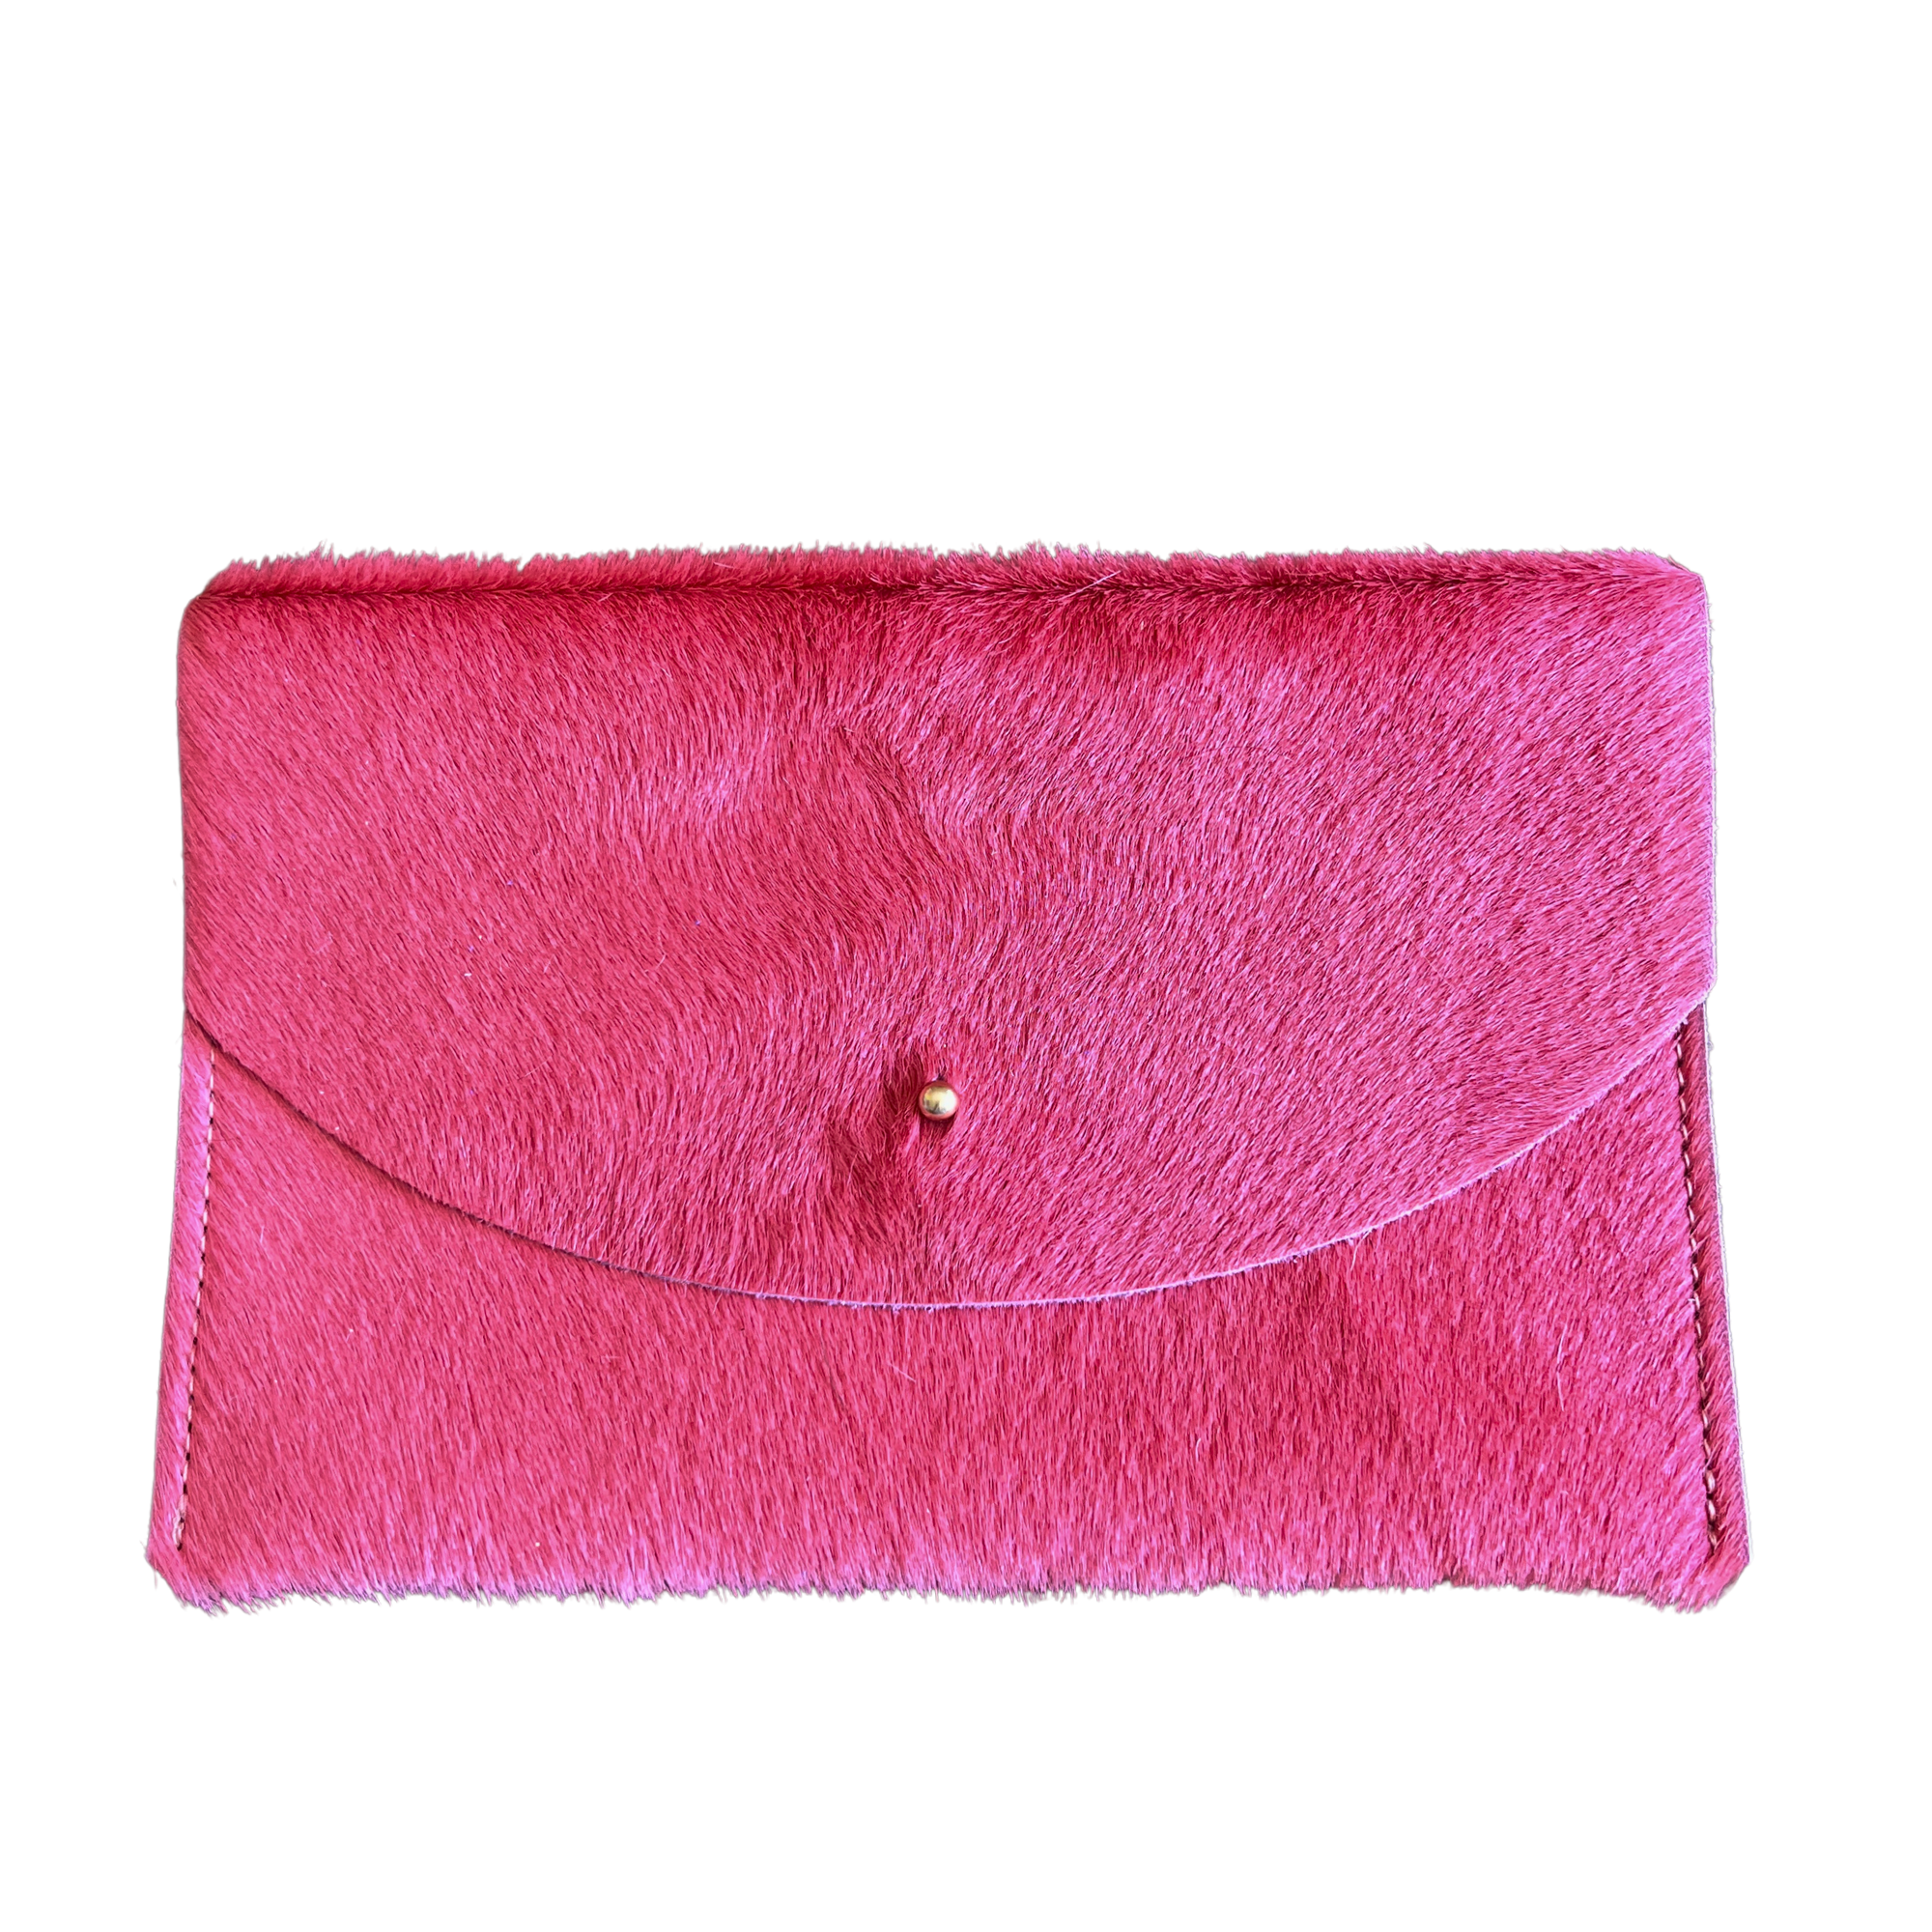 Salmon Hair on Hide Envelope Pouch